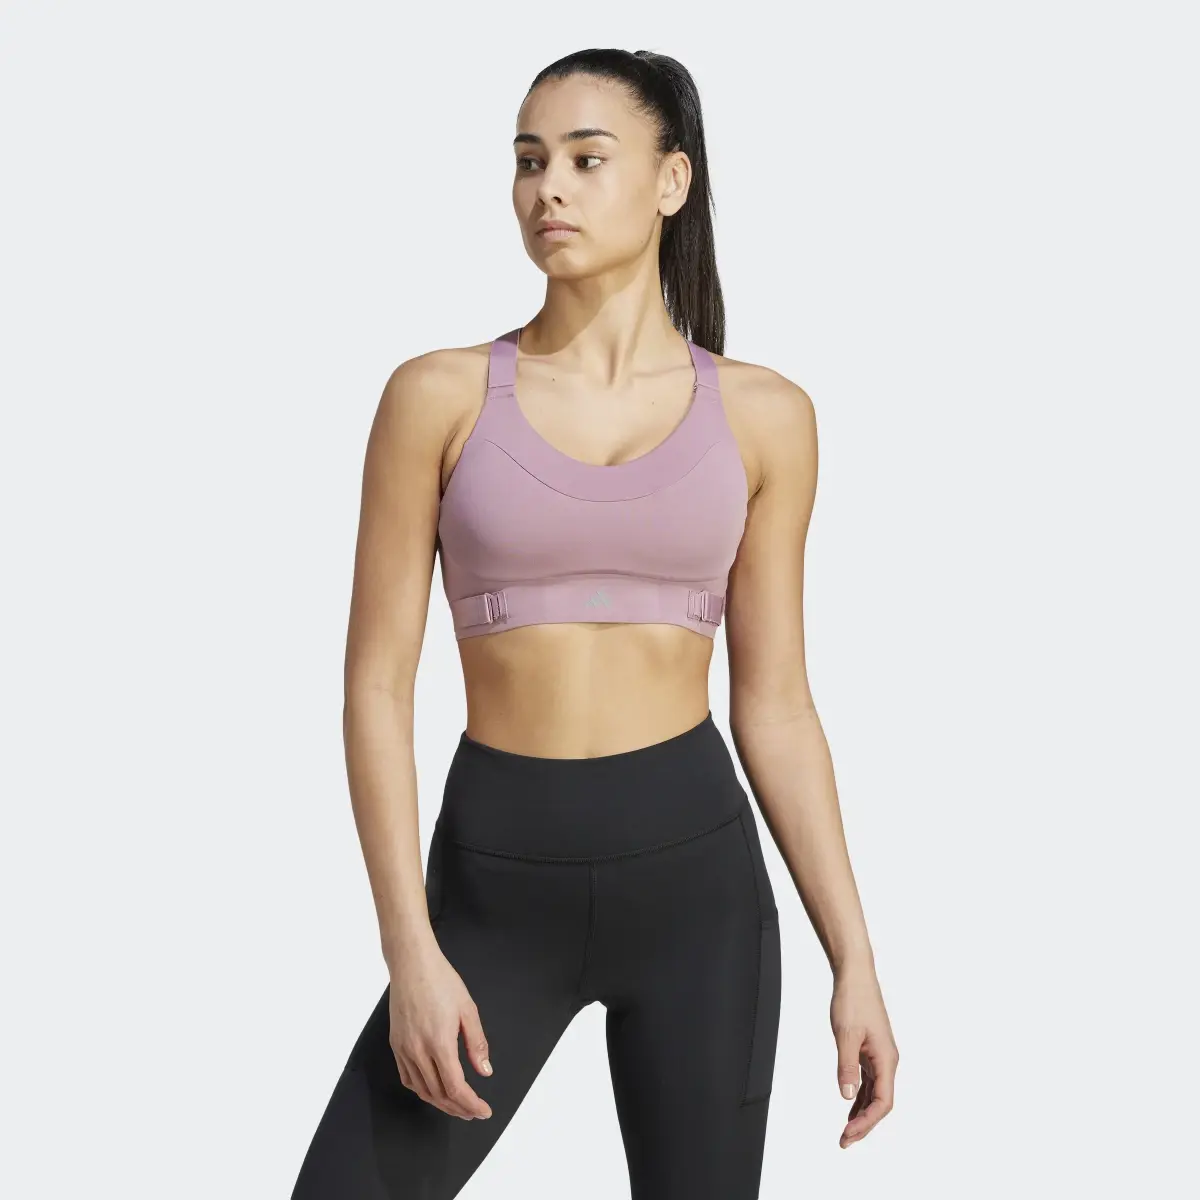 Adidas Brassière Collective Power Fastimpact Luxe Maintien fort. 2